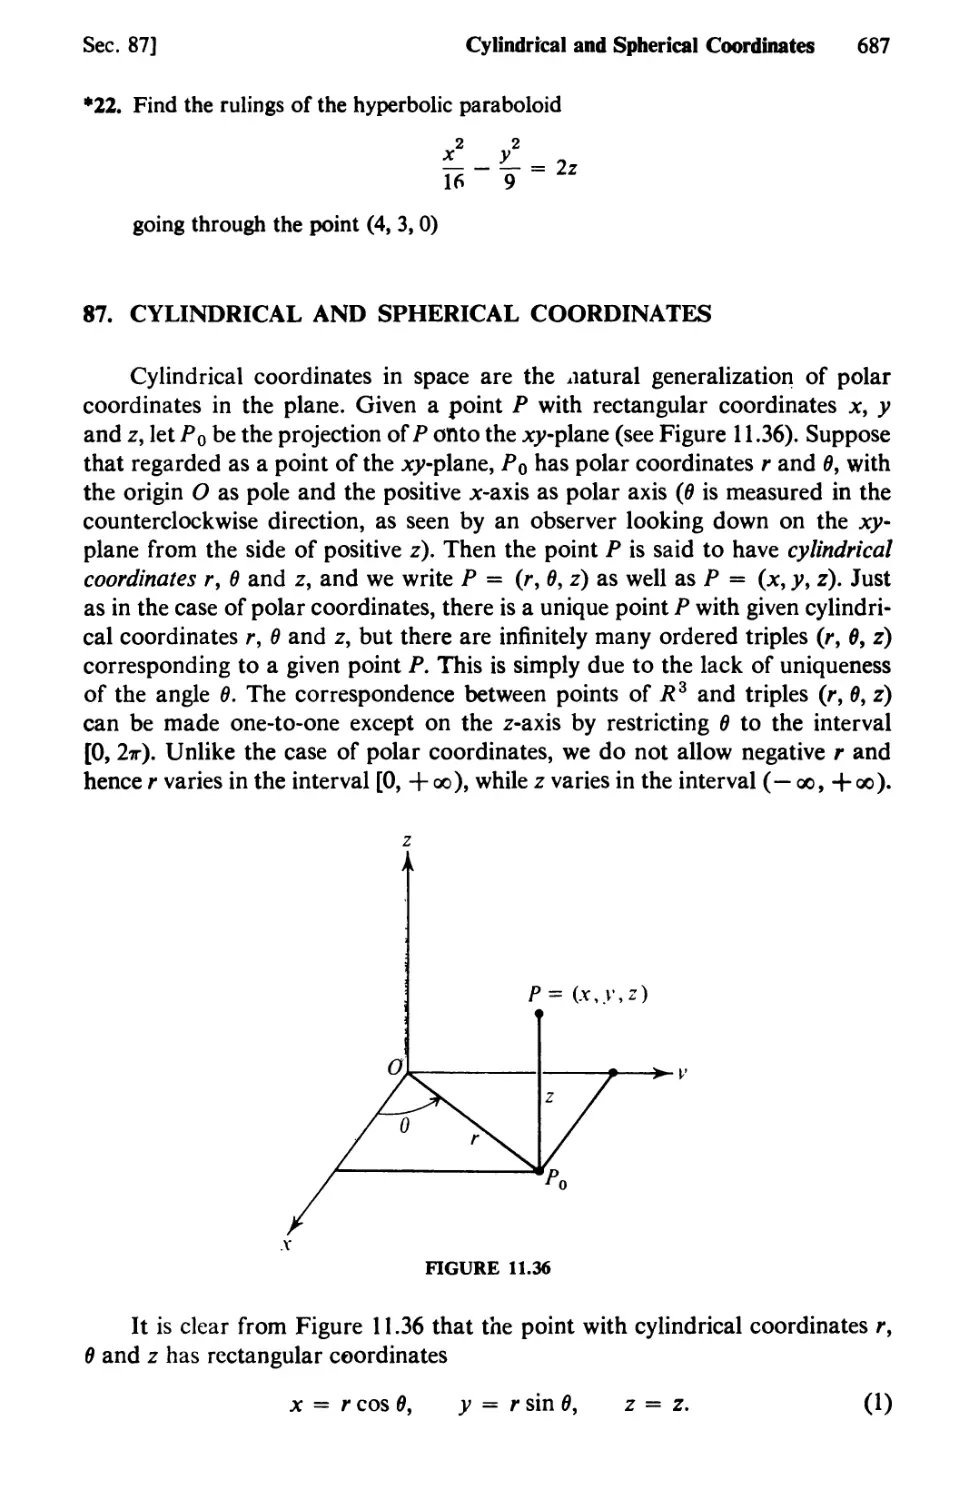 87. Cylindrical and Spherical Coordinates